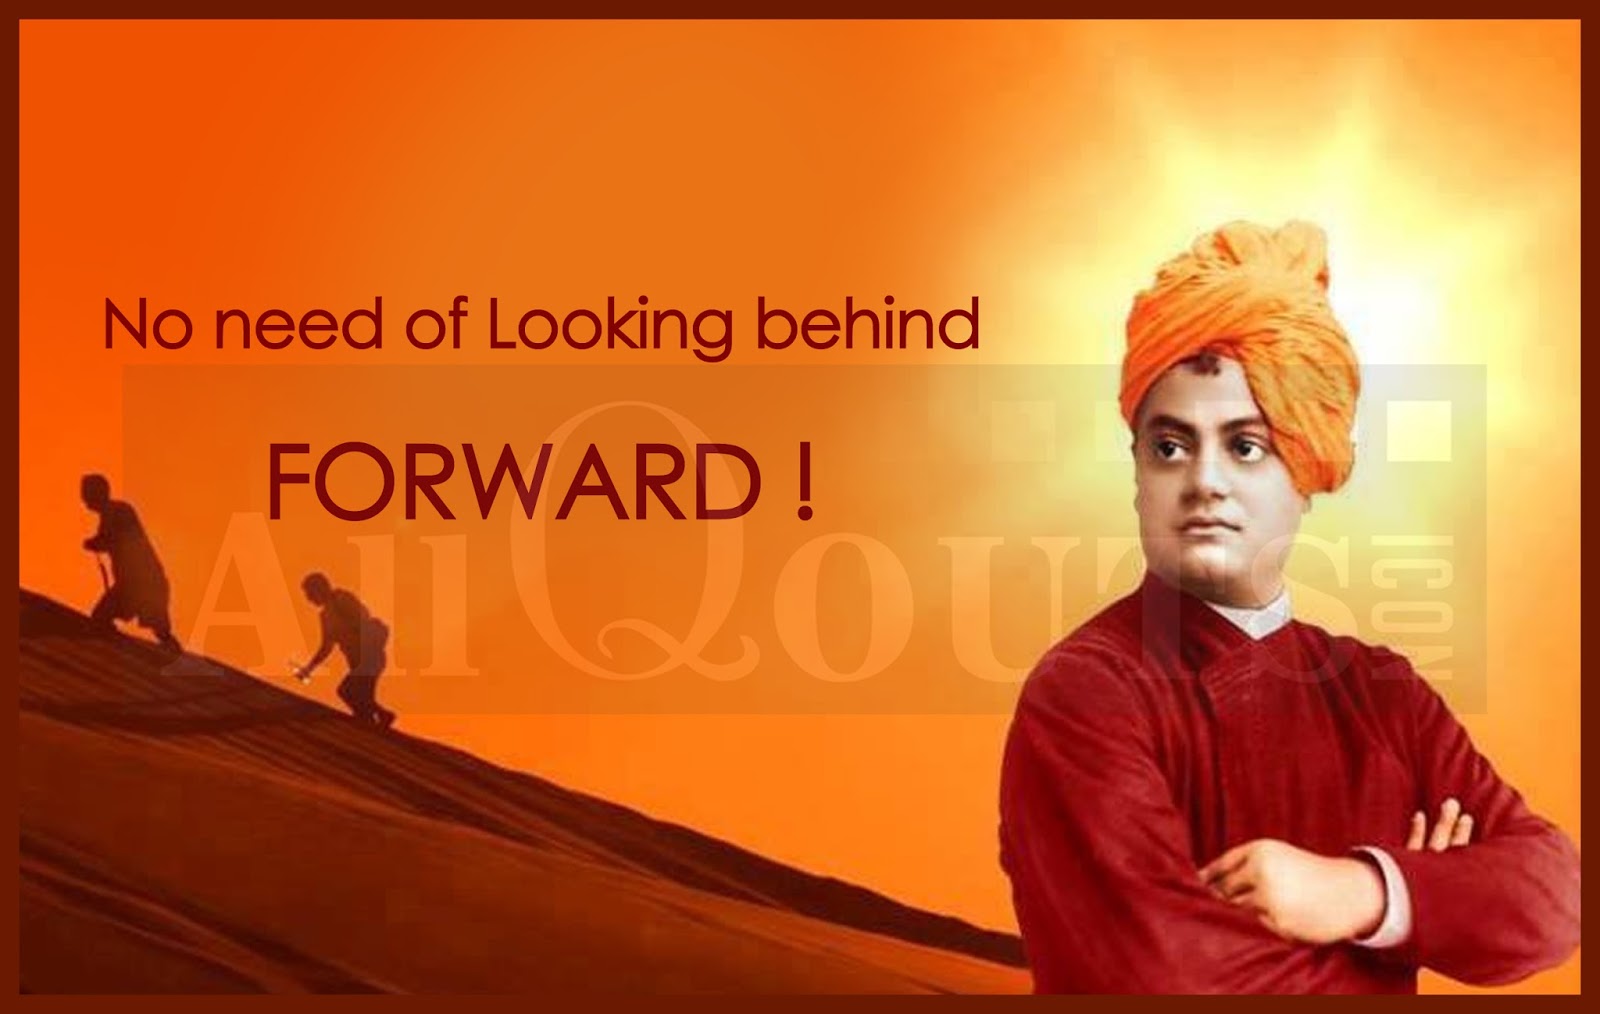 An Incredible Compilation of Swami Vivekananda HD Images - Over 999 ...